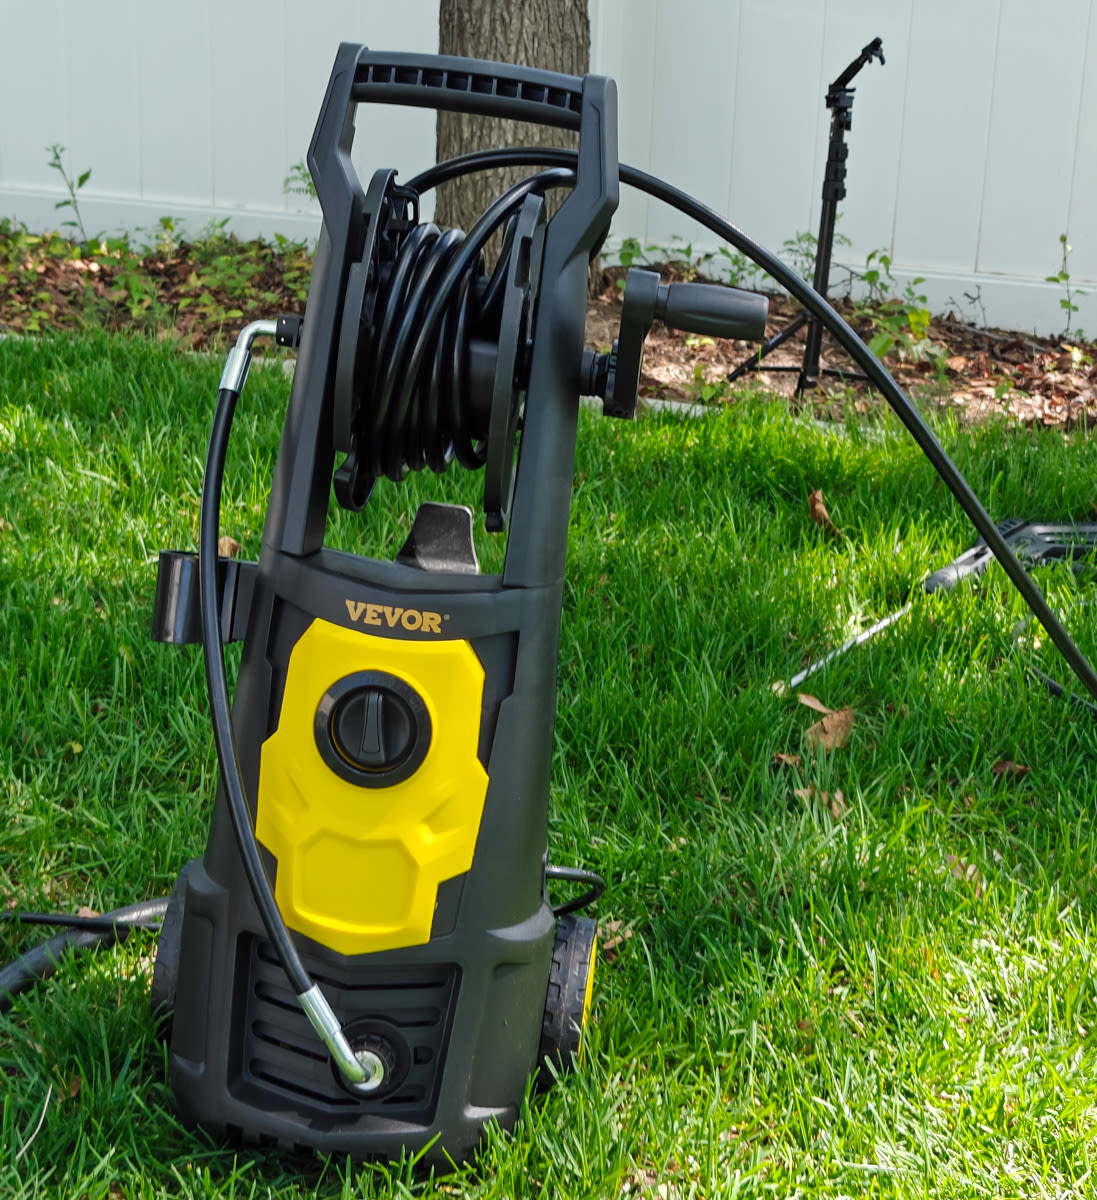 VEVOR Electric Pressure Washer review - a great all-rounder power washer - The Gadgeteer